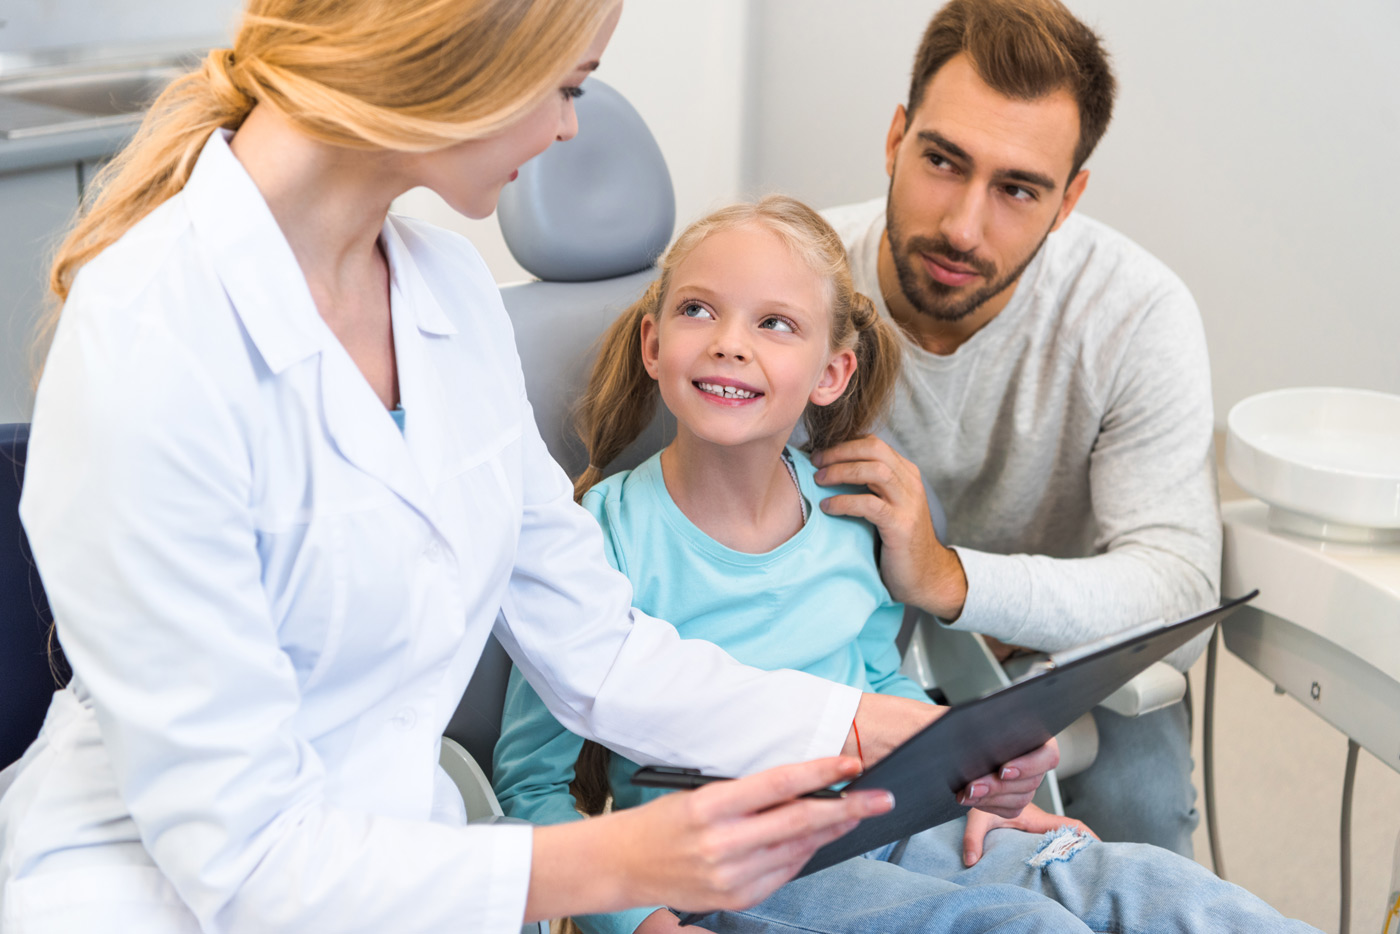 In an orthodontic consultation, a dentist showing a dental planner a child in the chair, while a comforting father looks on.